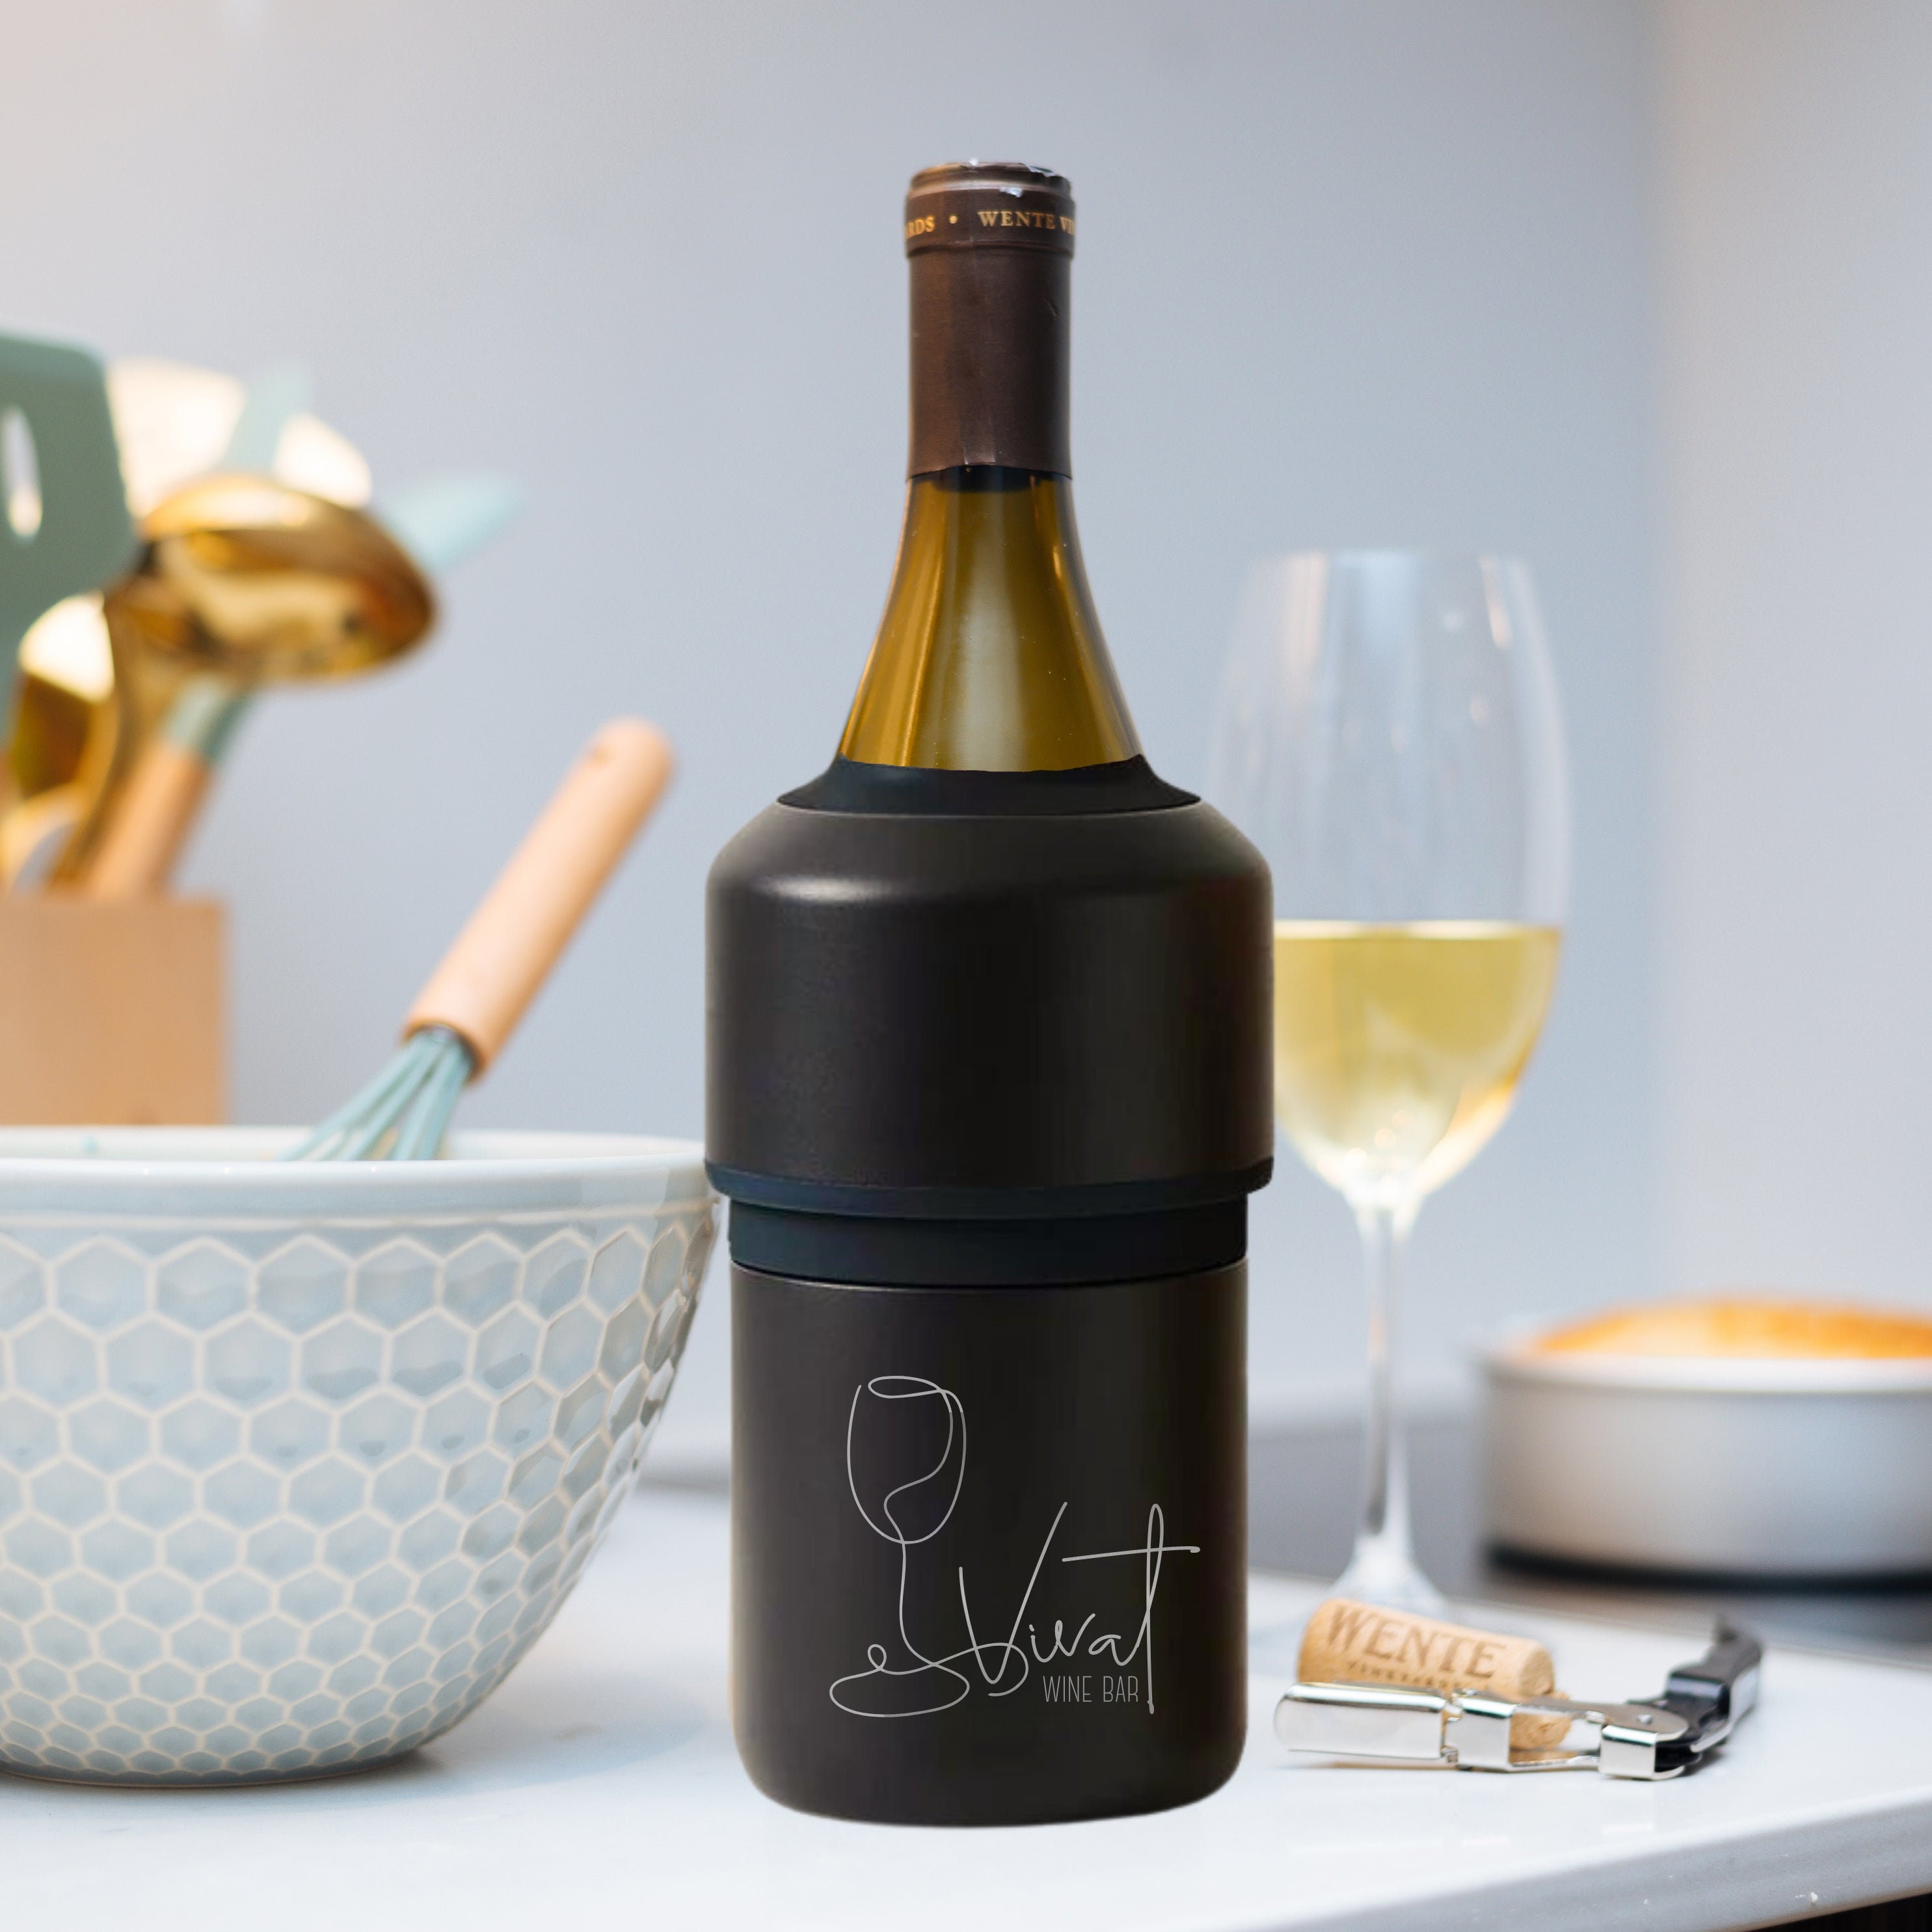 Personalized Double-Wall Insulated Wine Bottle Cooler - Floral Monogram